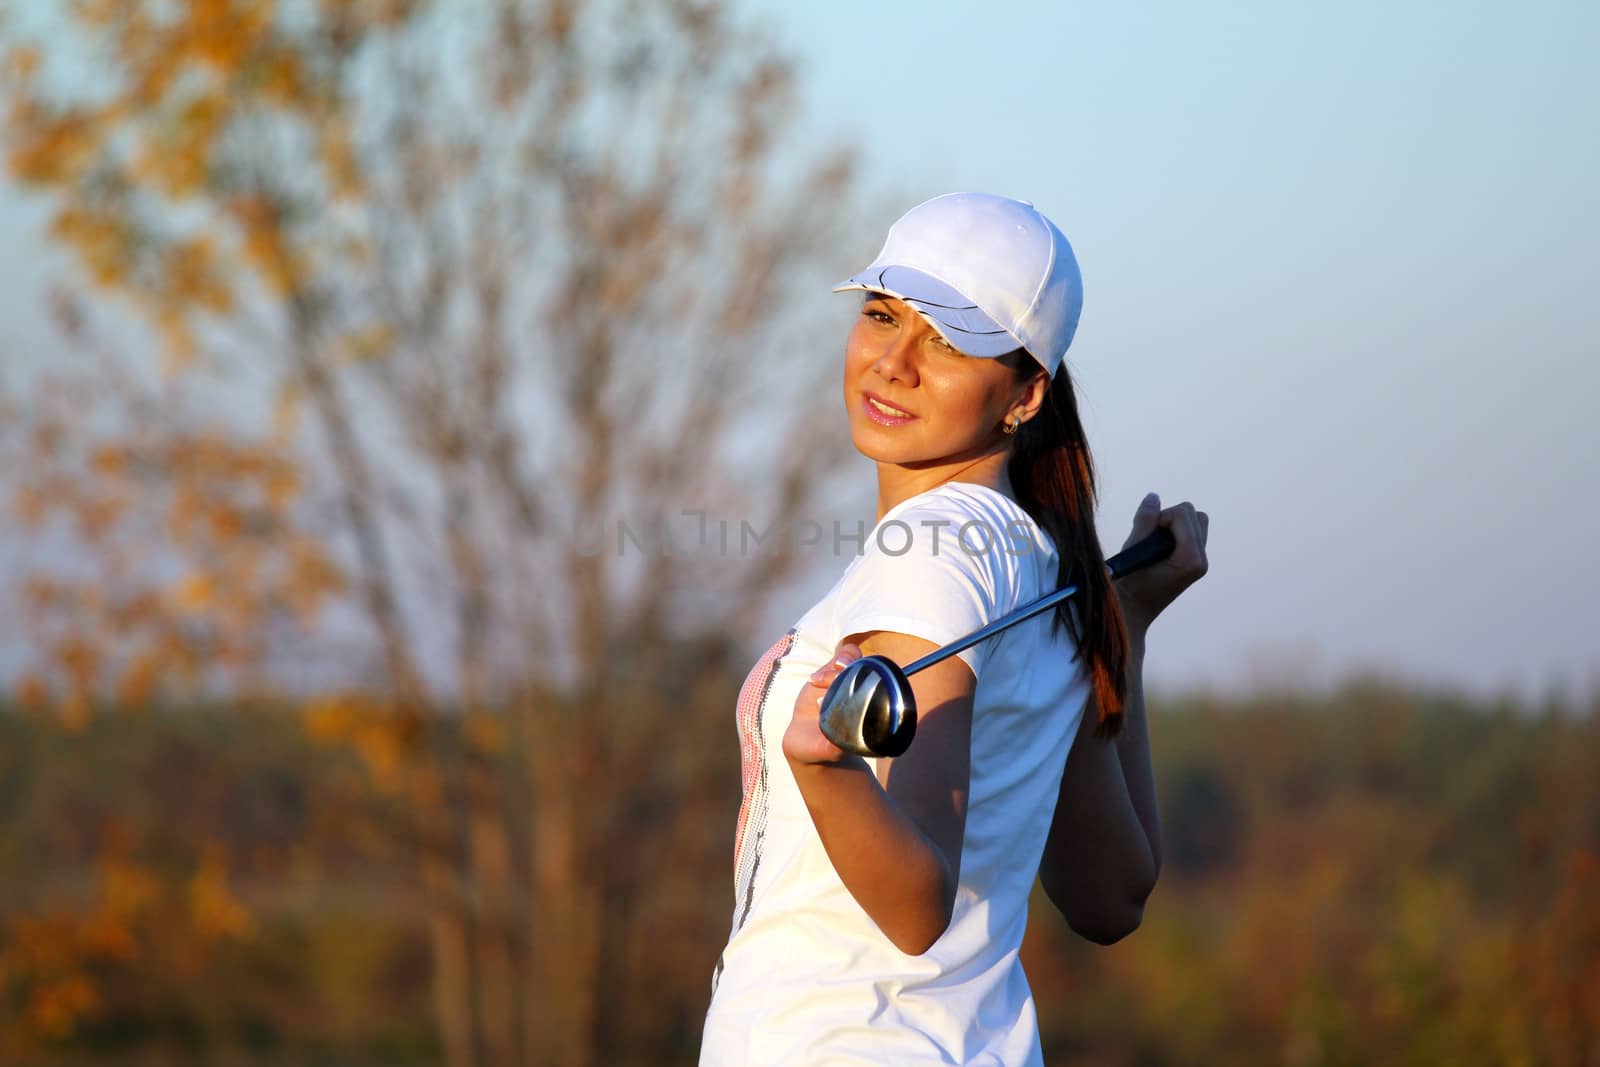 girl golf player outdoor portrait by goce